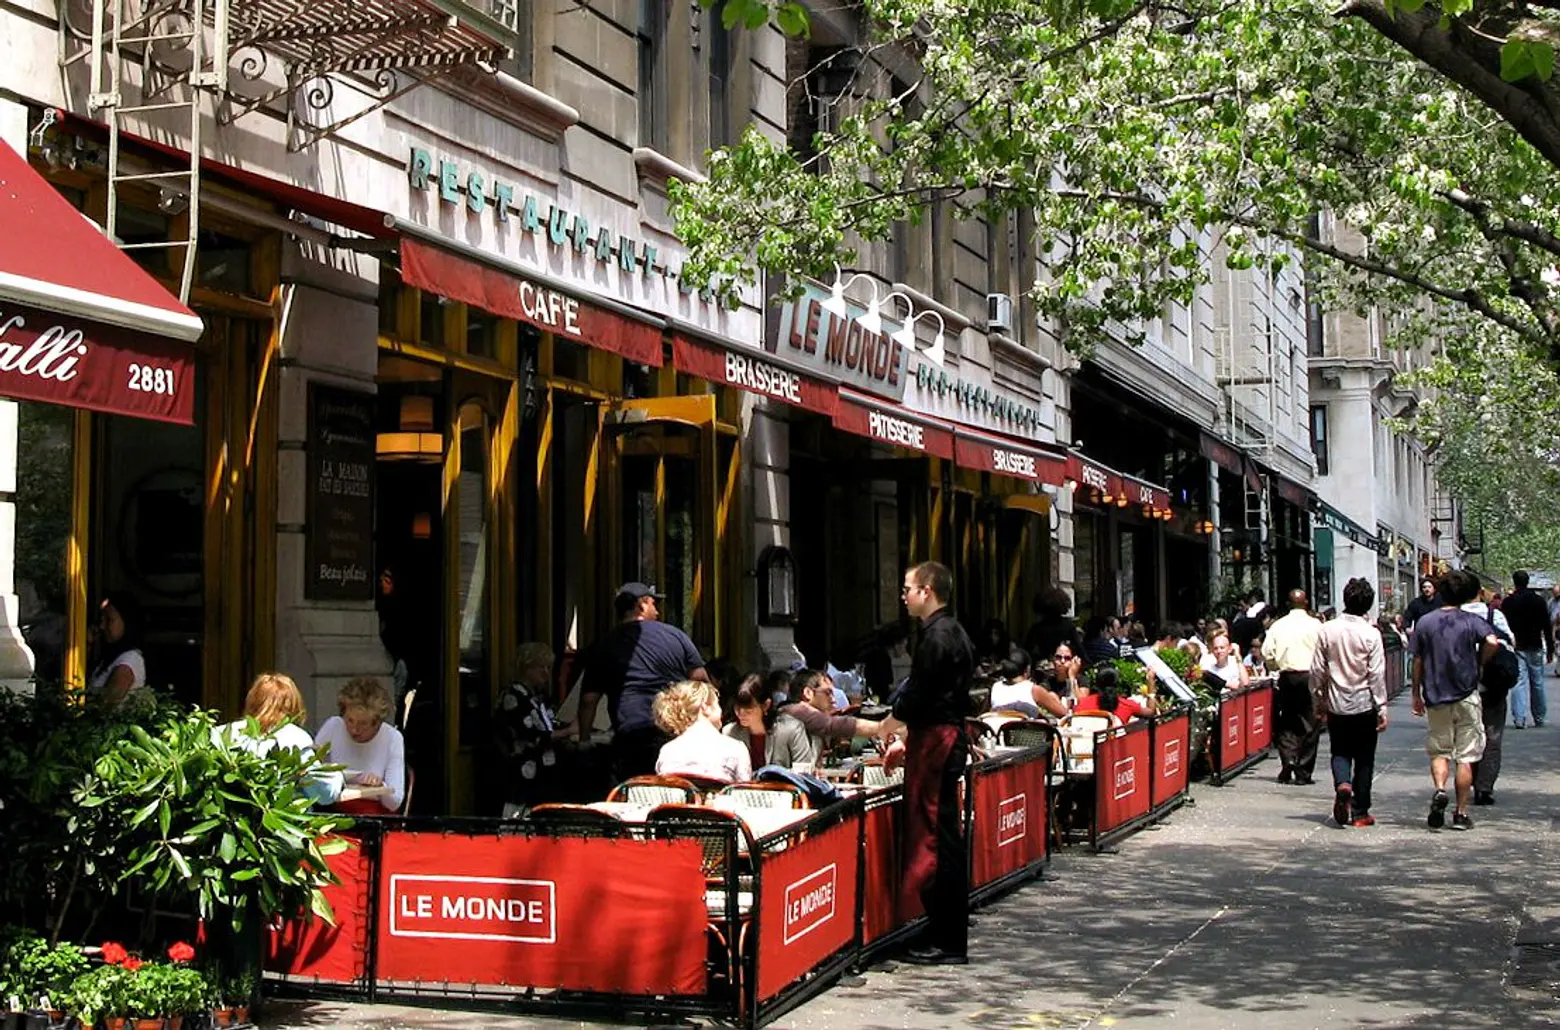 NYC sidewalk cafe, outdoor dining NYC